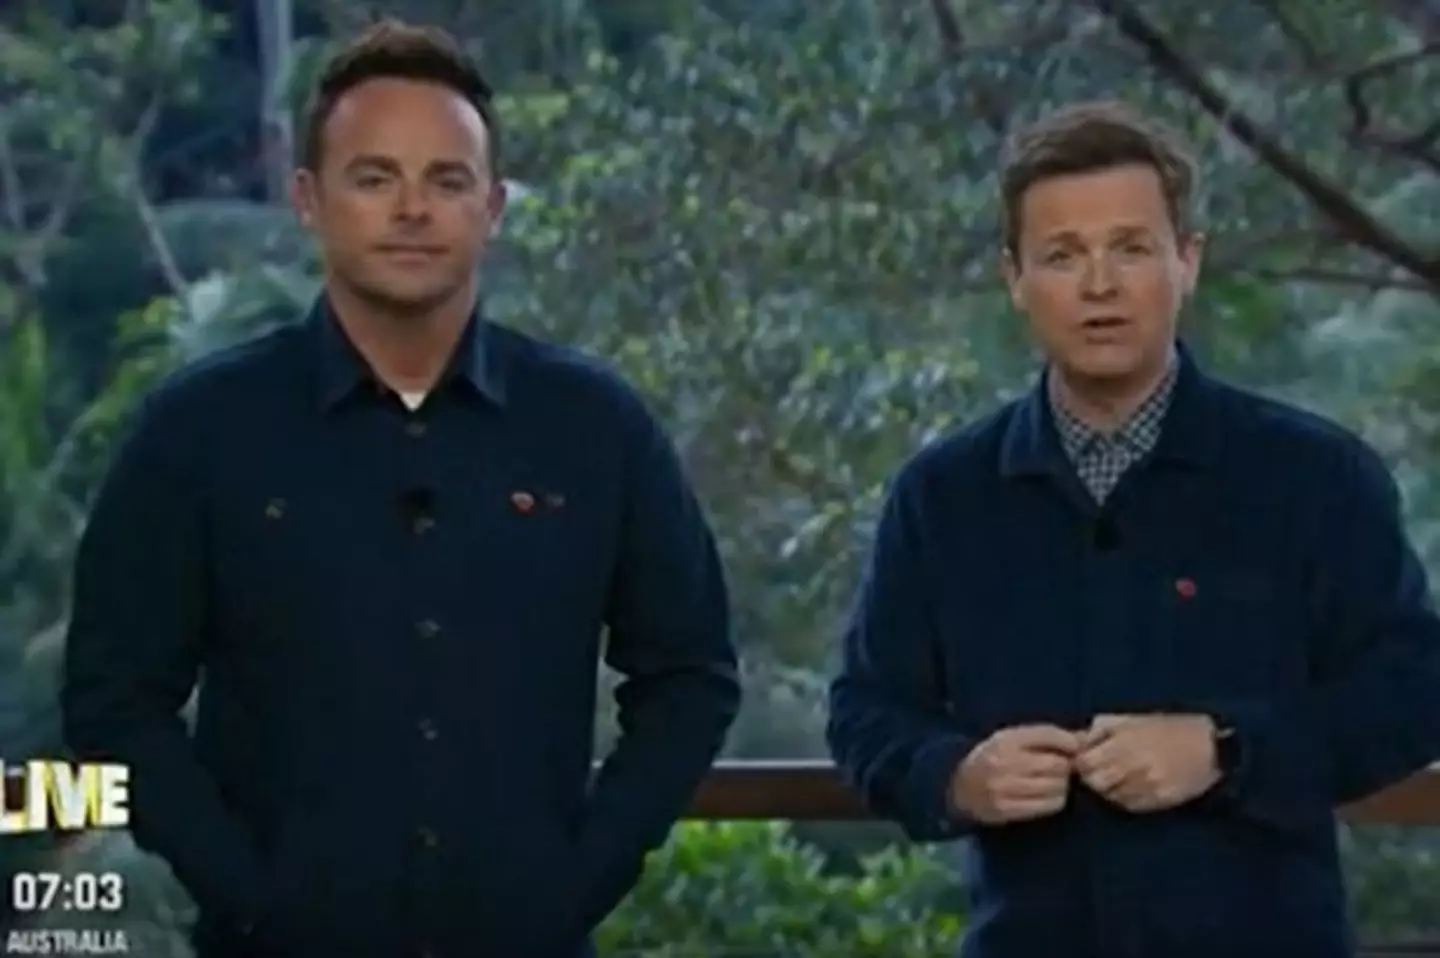 Ant and Dec have now addressed the former Health Secretary being a part of the show.